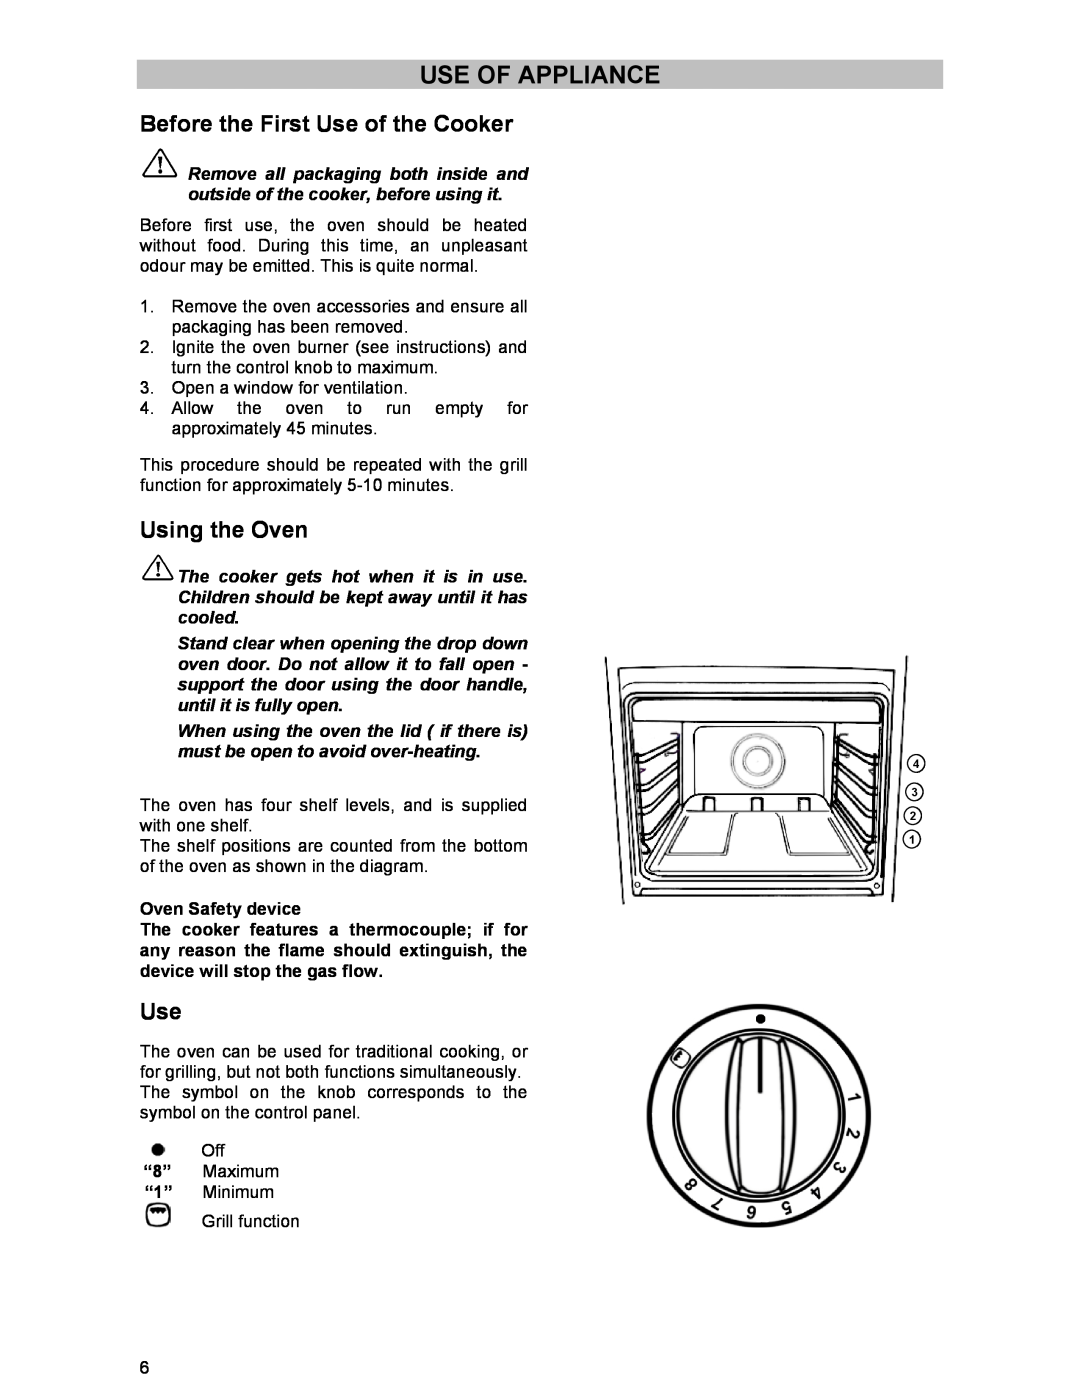 Electrolux DSO51GA manual Use Of Appliance, Before the First Use of the Cooker, Using the Oven 